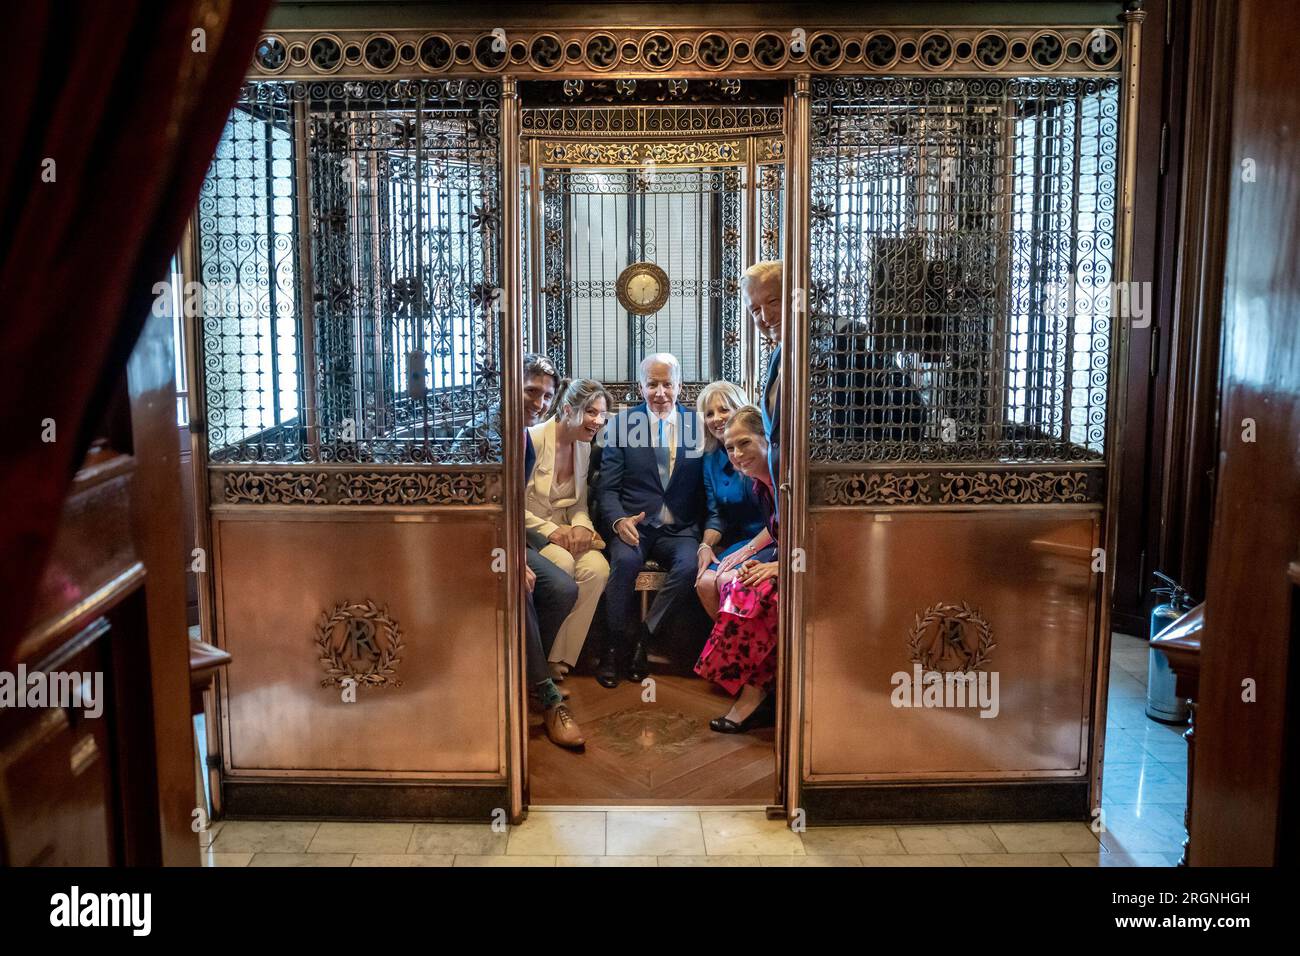 Reportage: Joe Biden, along with wife Jill Biden, visit Mexico City (January 2023) - President Joe Biden, First Lady Jill Biden, Mexican President Andres Manuel Lopez Obrador, his wife Dr. Beatriz Gutiérrez Müller, Canadian Prime Minister Justin Trudeau and his wife Sophie Gregoire Trudeau pose for a photo in the elevator at the National Palace, Tuesday, January 10, 2023, in Mexico City. Stock Photo